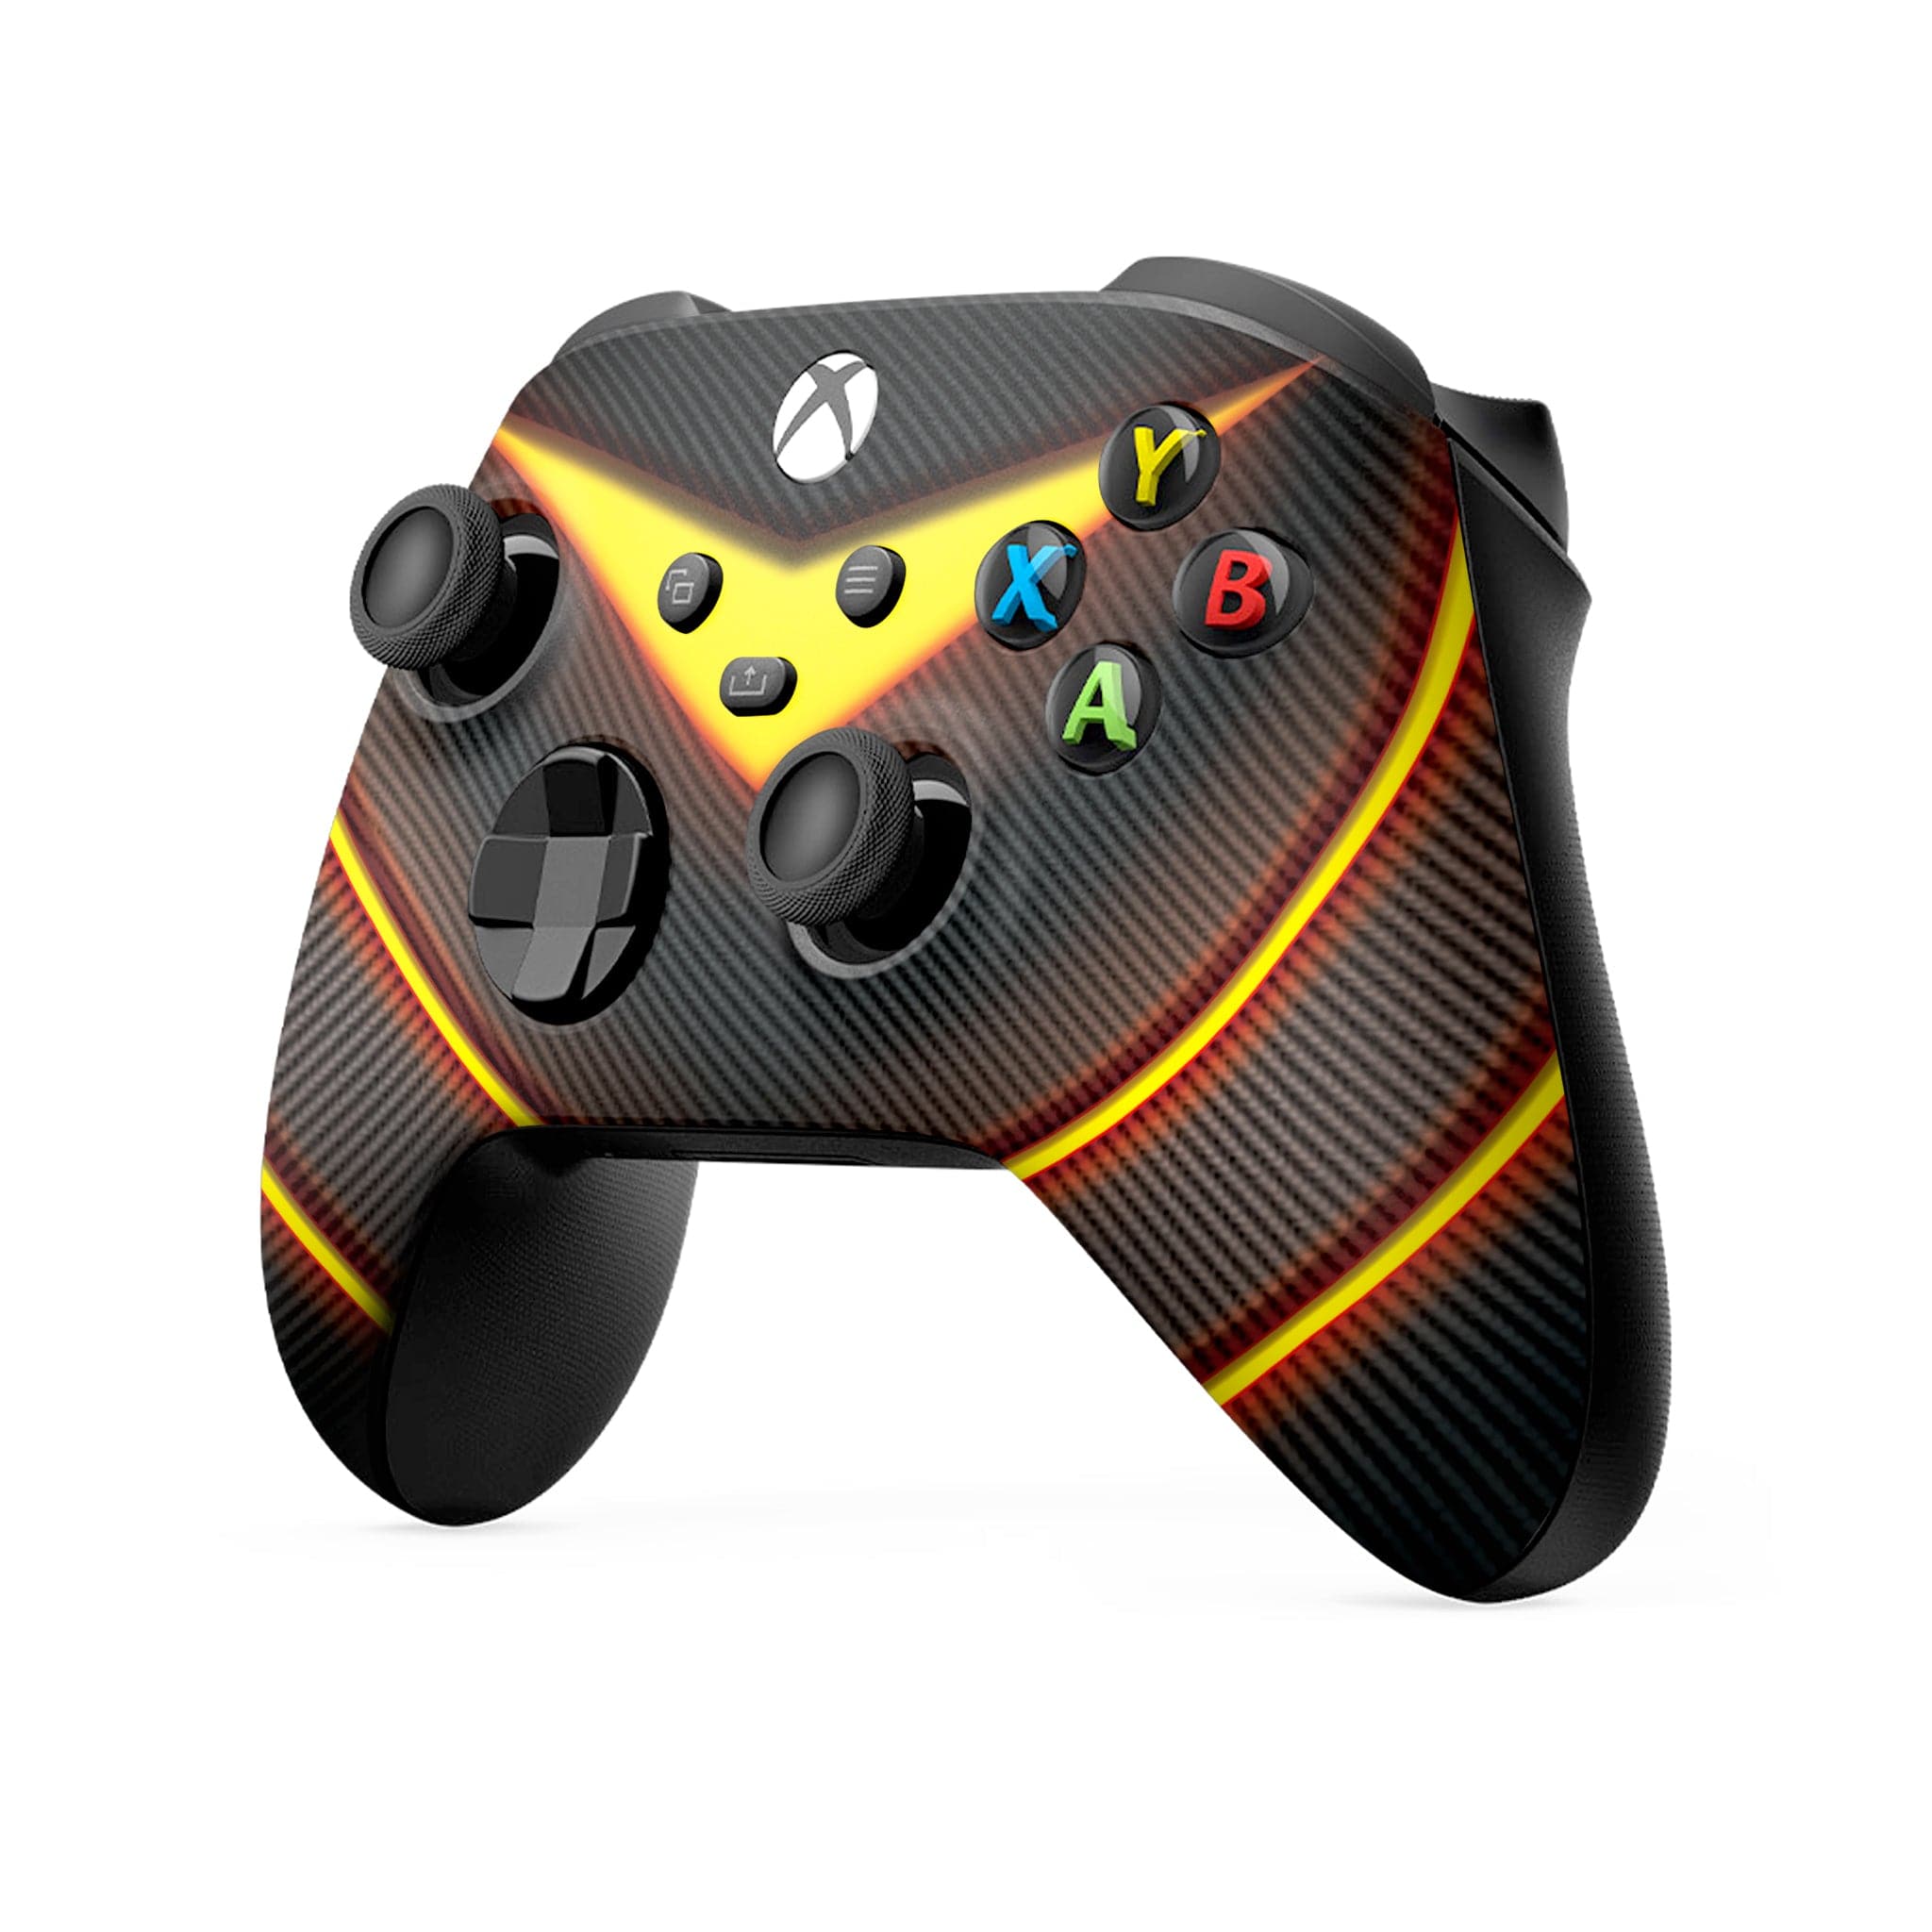 Shop Fortnite Omega Xbox Series X Modded Controller Price